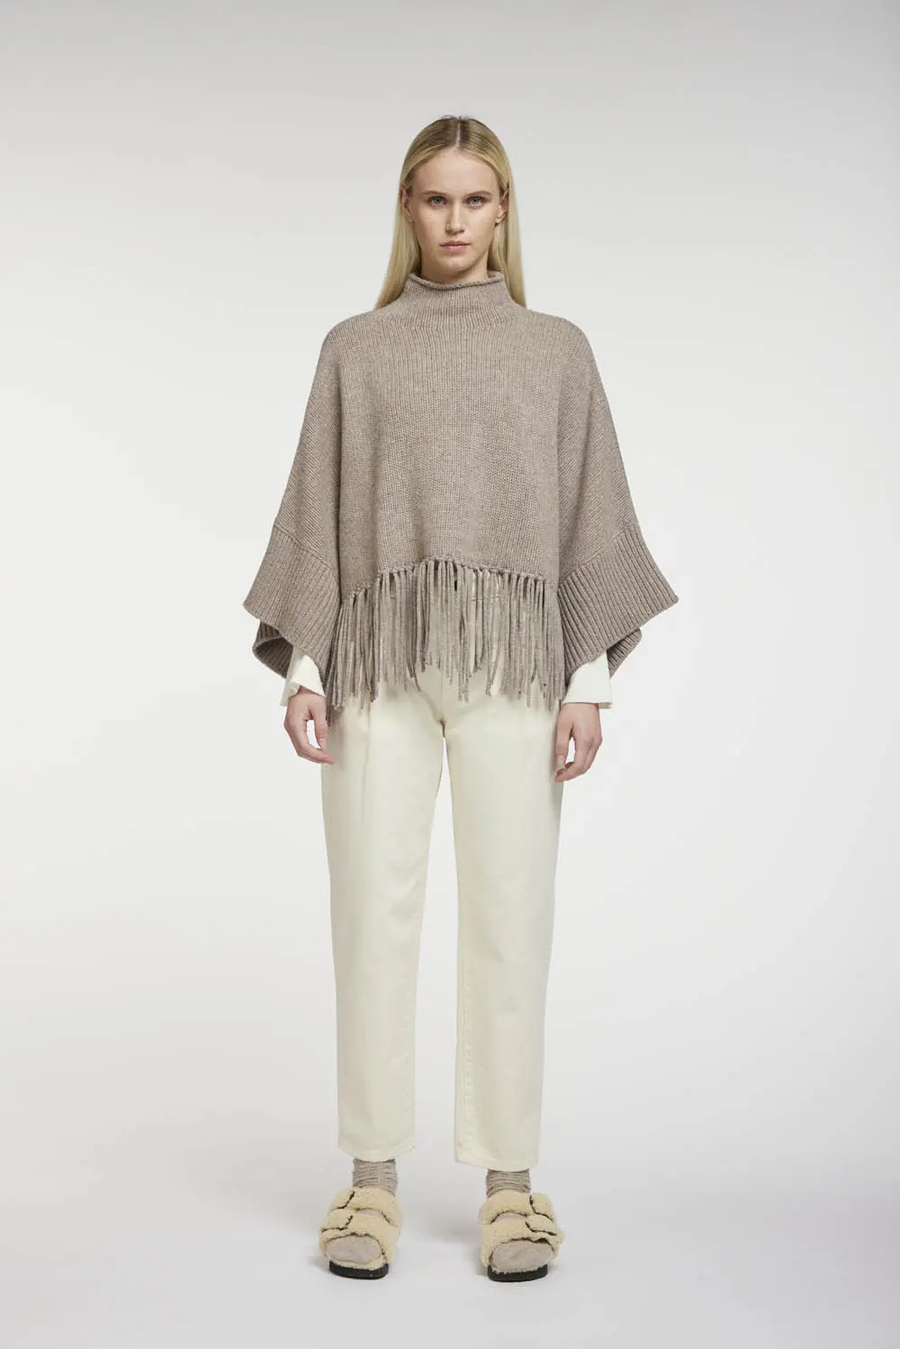 SKILLS & GENES - VIRGIN WOOL PONCHO WITH FRINGES INTENSE SAND